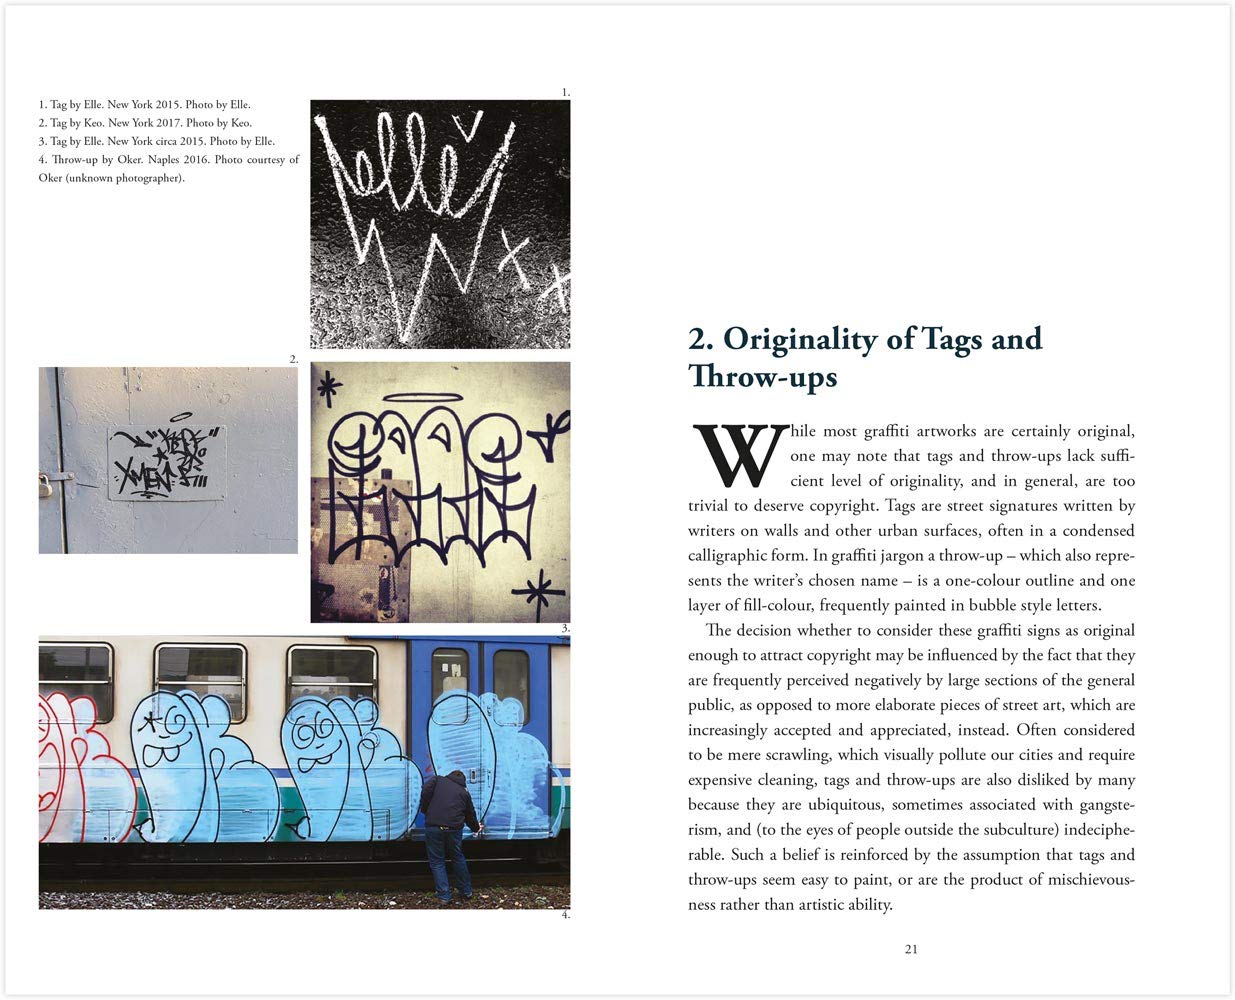 Protecting Art in the Street: A Guide to Copyright in Street Art and Graffiti